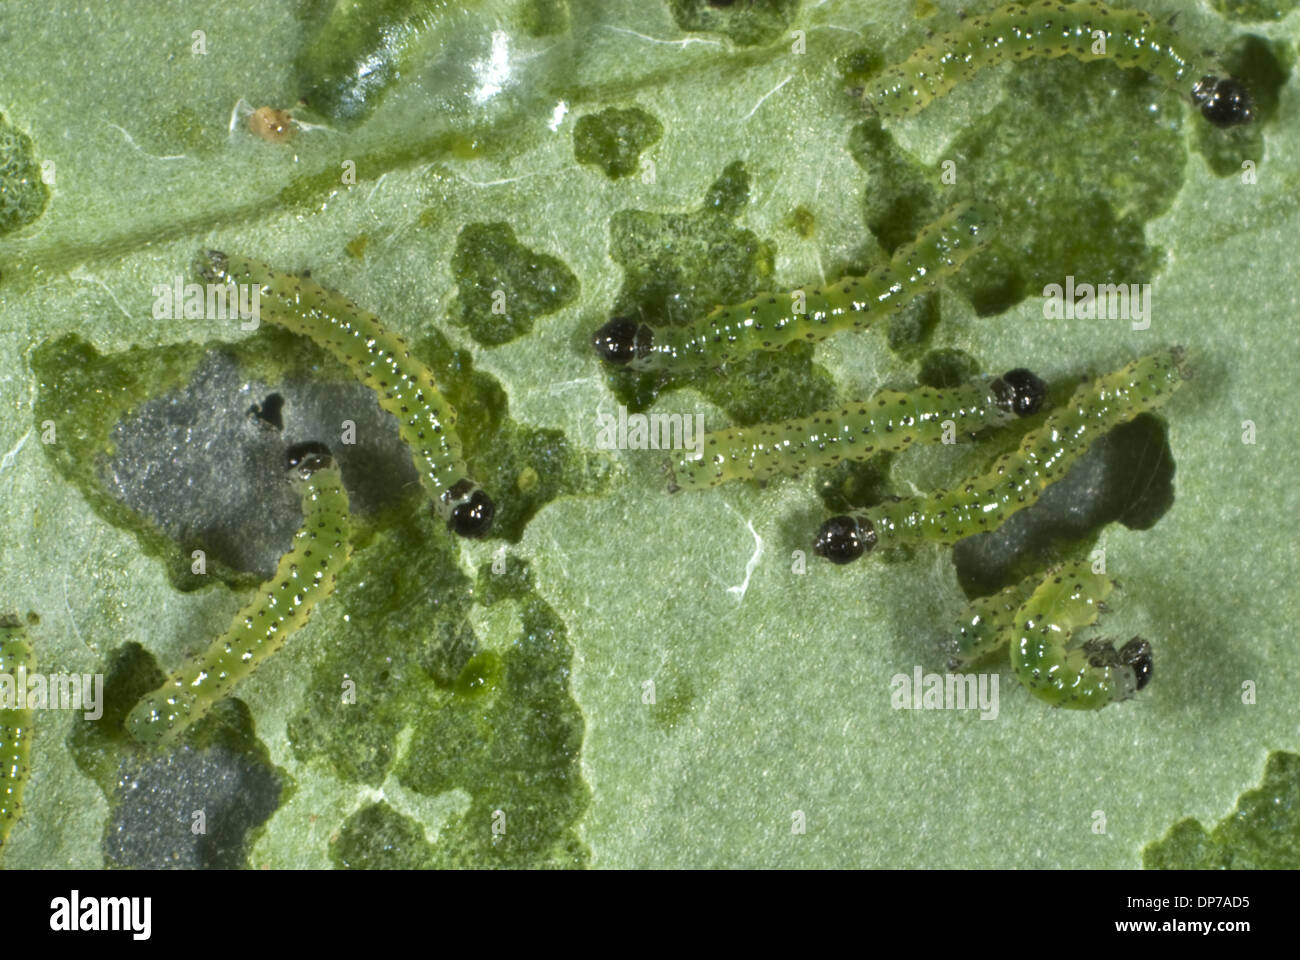 small white butterfly, Pieris rapae, neonate caterpillars feeding on a cabbage leaf Stock Photo